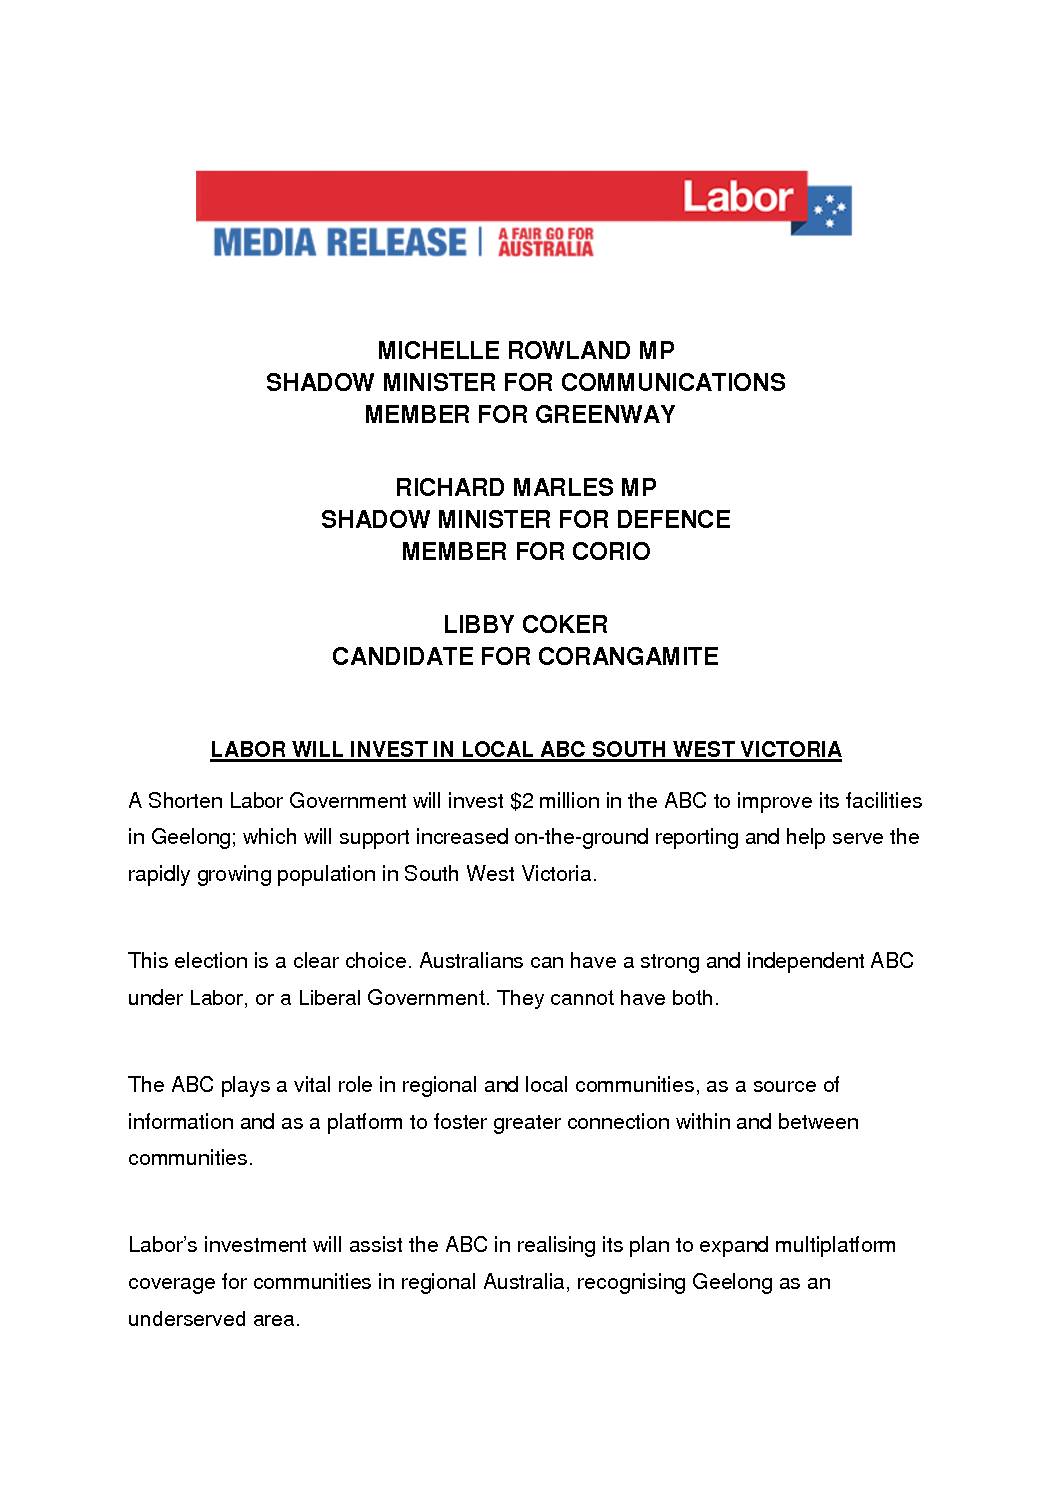 19.05.10 LABOR WILL INVEST IN LOCAL ABC SOUTH WEST VICTORIA